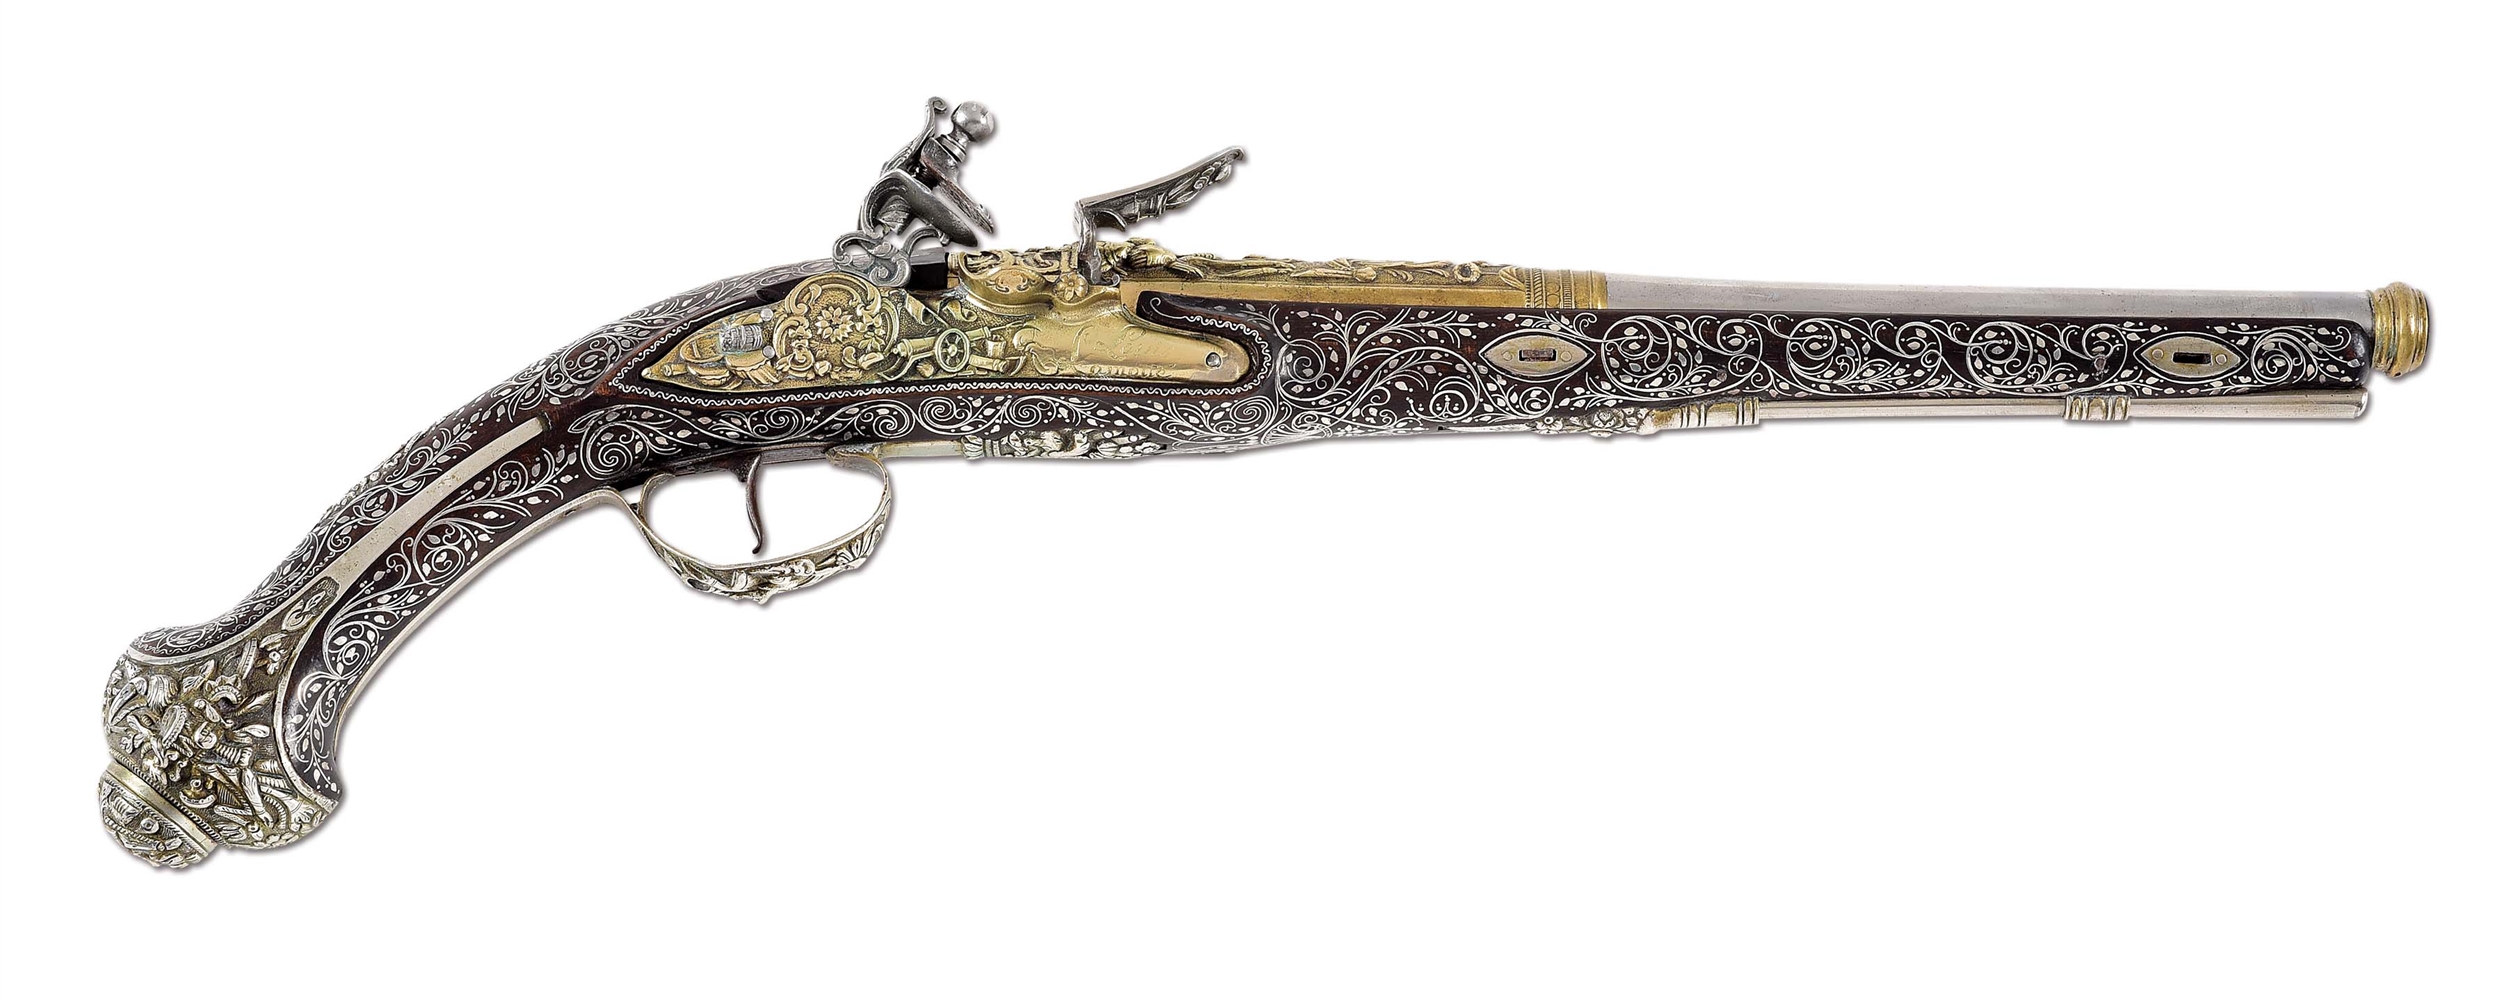 (A) A FRENCH FLINTLOCK PISTOL MARKED LOUIS LAMOTTE, WITH EXTENSIVE BRASS DECORATIONS AND SILVER INLAY ON STOCK, LIKELY MADE FOR THE MIDDLE EASTERN OR TOURIST TRADE.